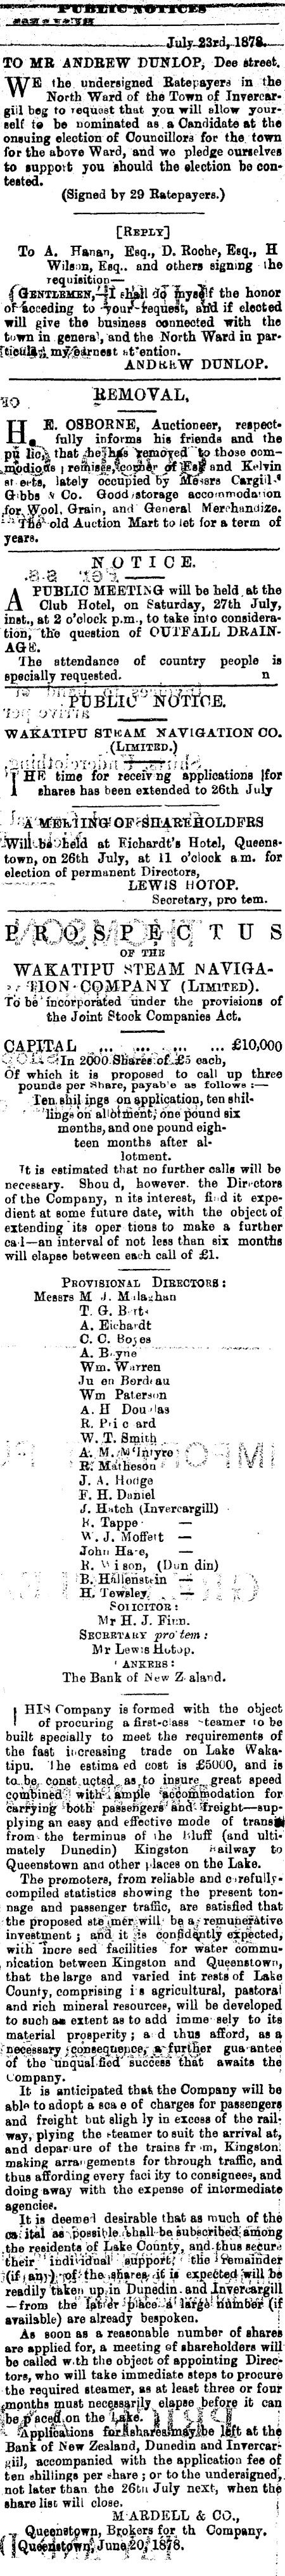 Papers Past Newspapers Southland Times 25 July 1878 Page 3 Advertisements Column 5